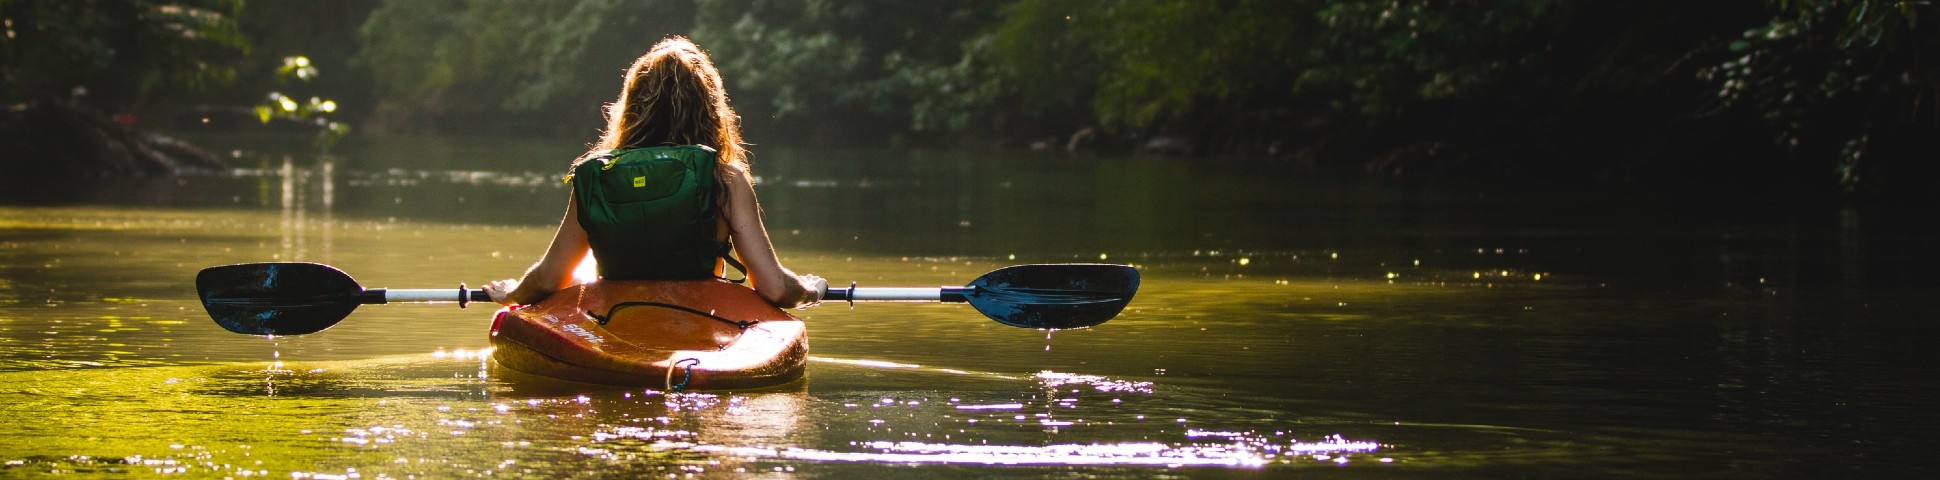 Lady kayaking in the river